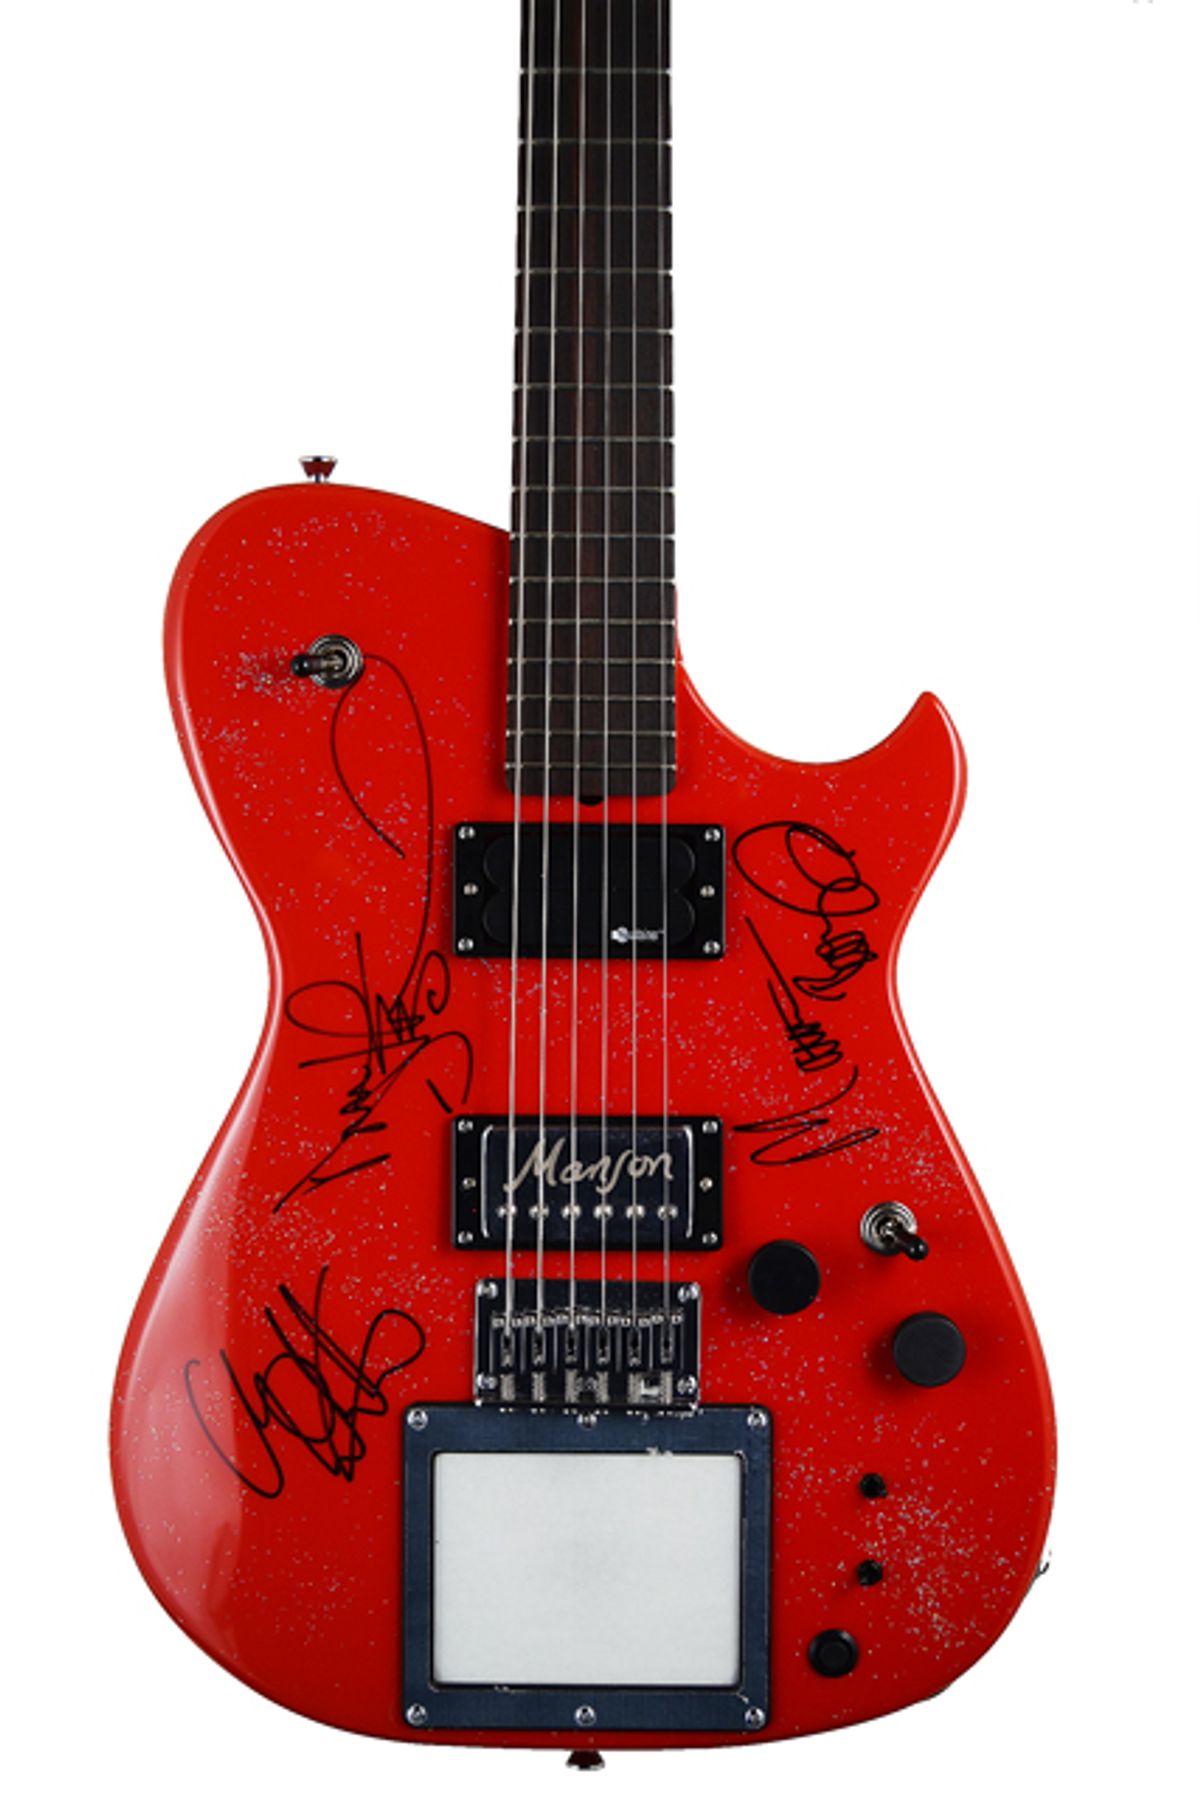 Manson’s Announce Charity Auction of Rare MB-1 Guitar Signed by Muse